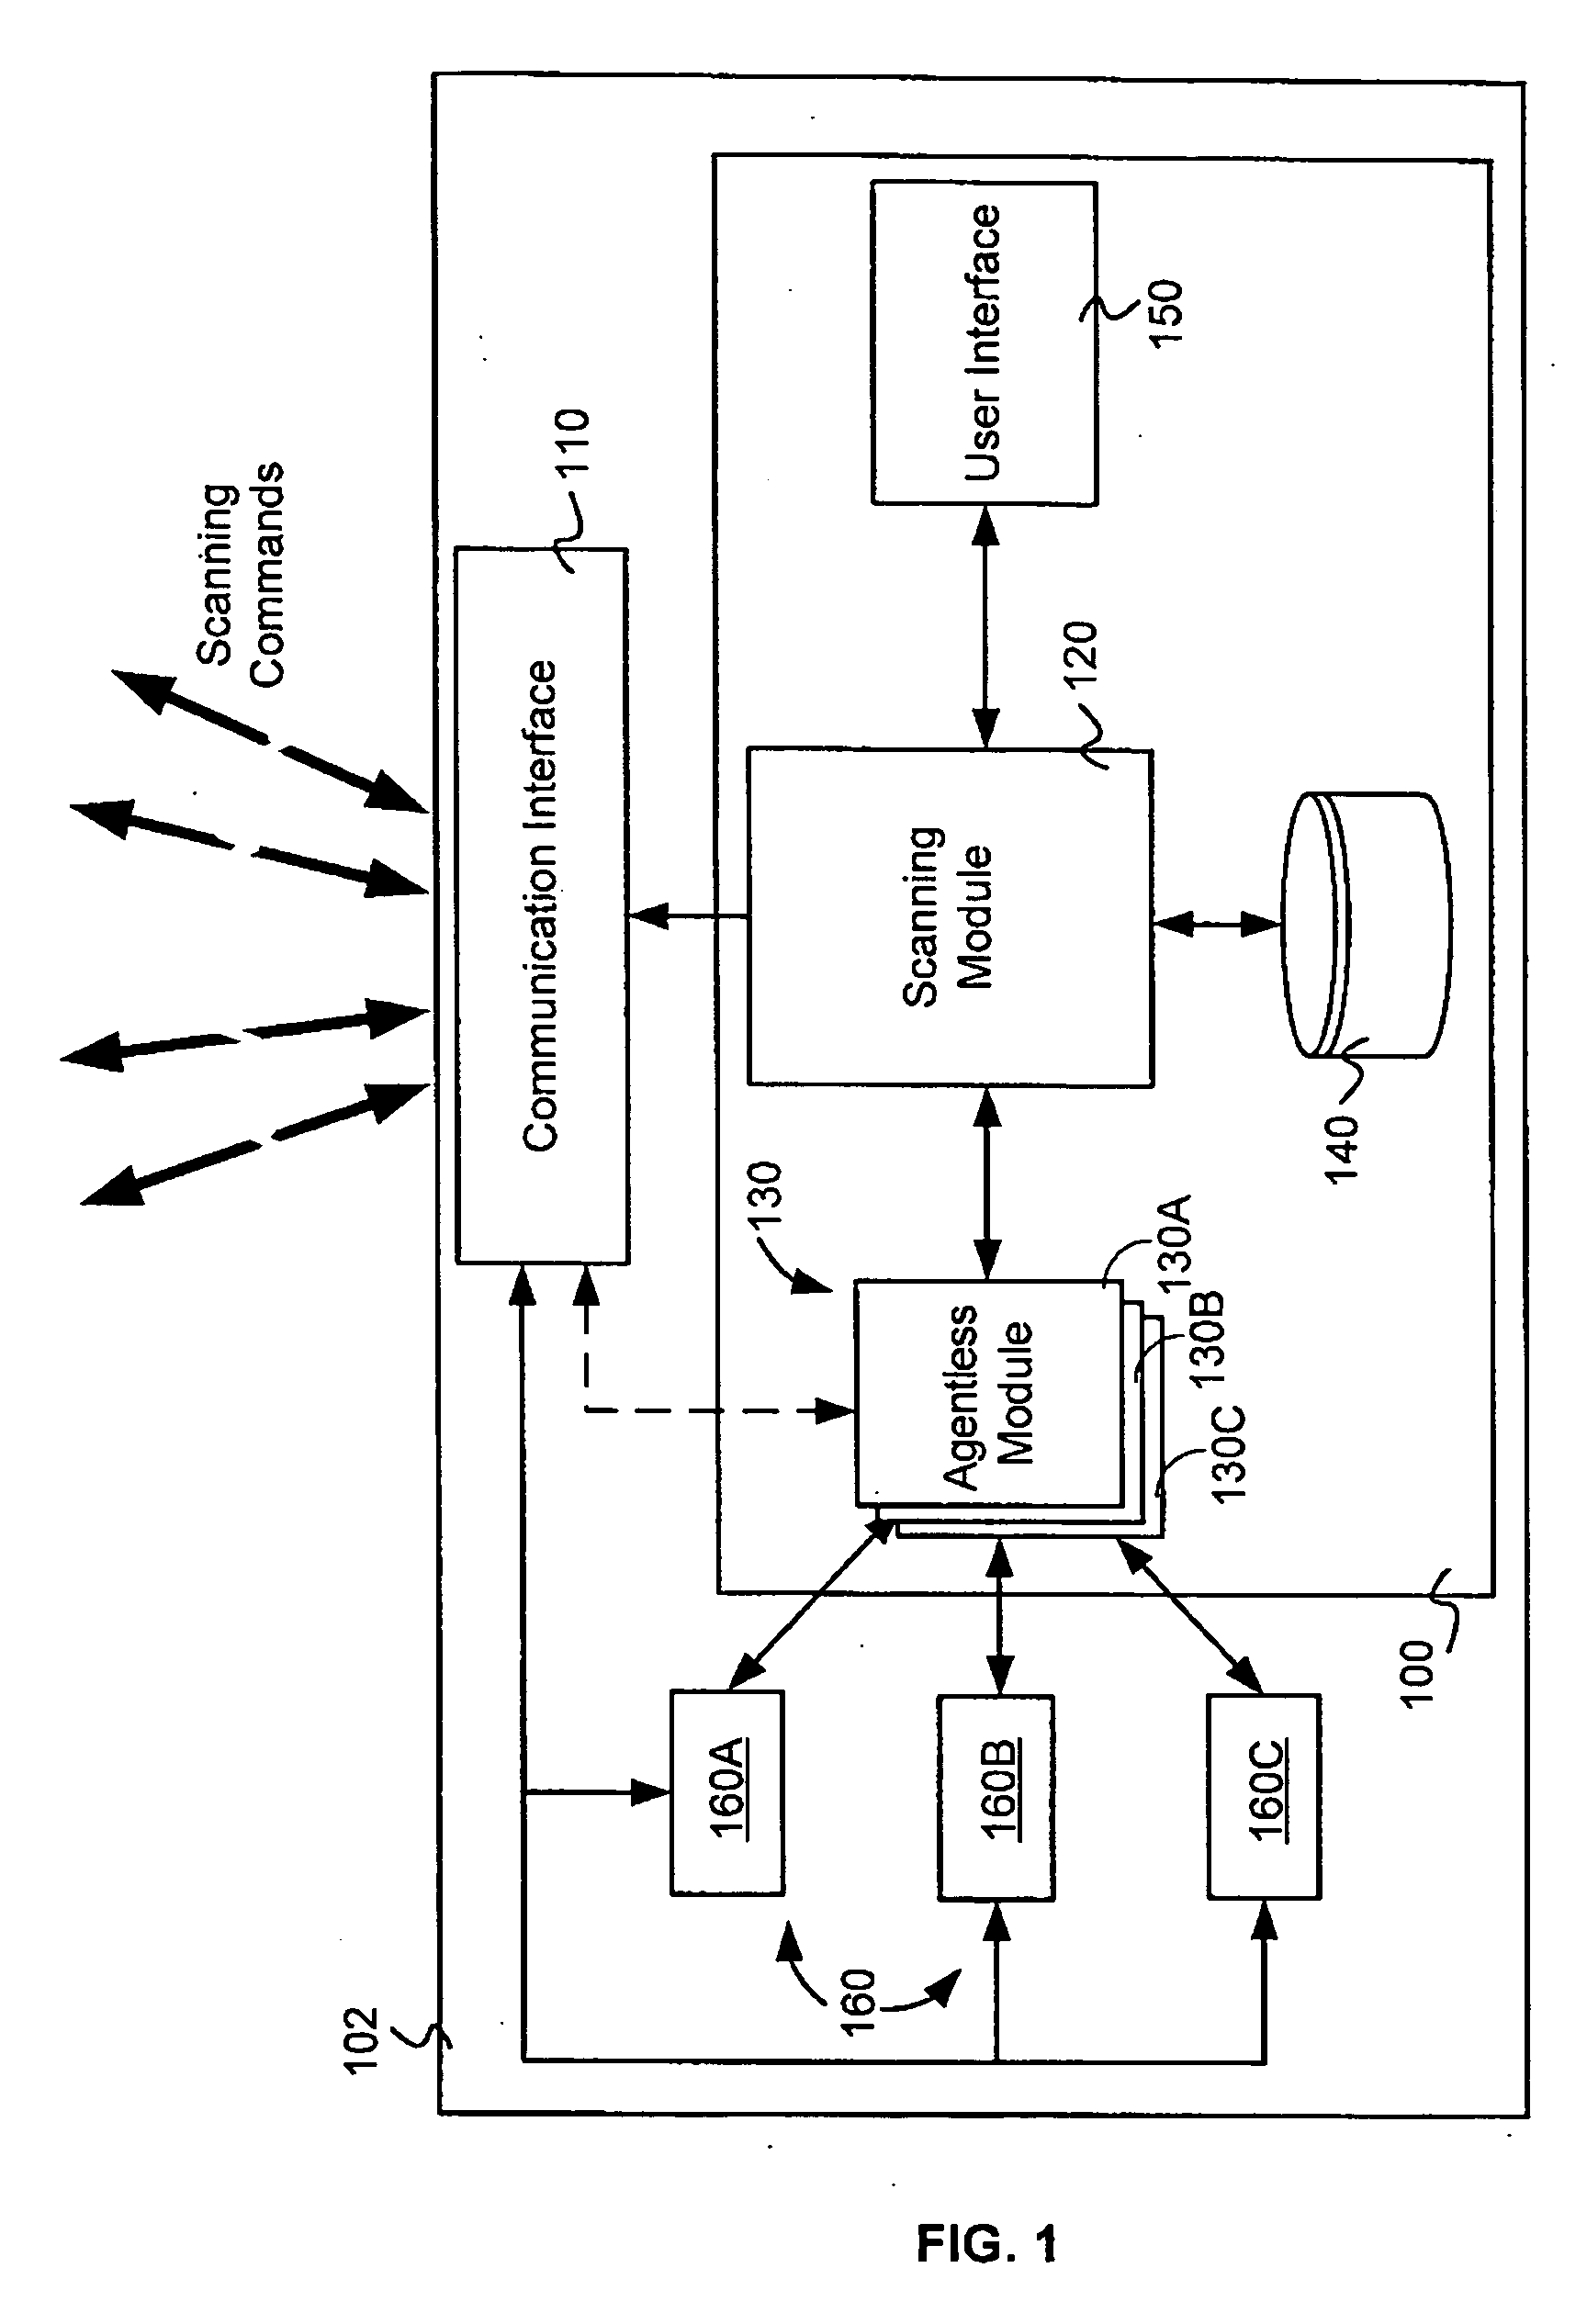 Method and device for scanning a plurality of computerized devices connected to a network